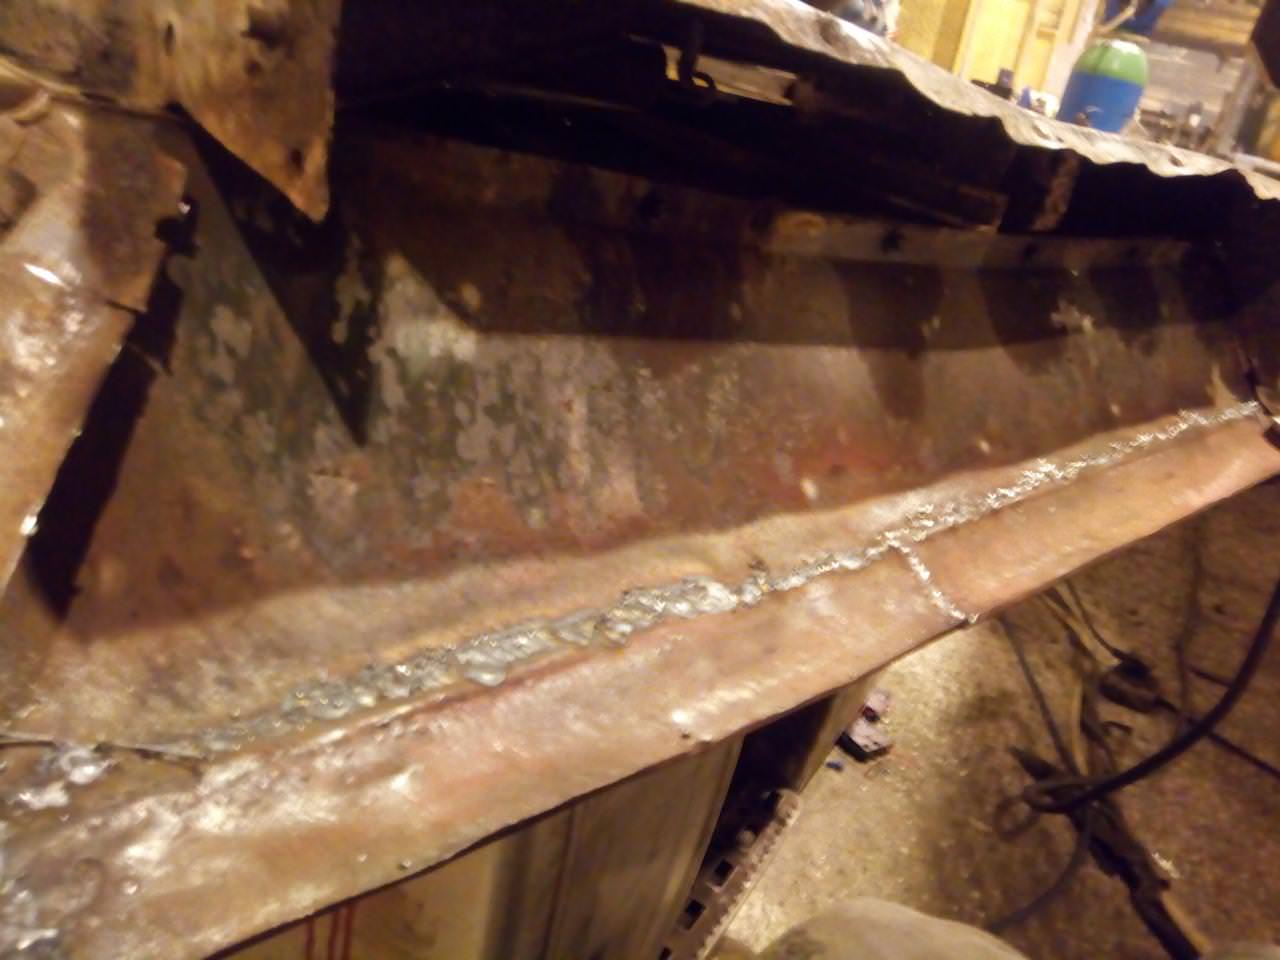 The bottom edge of the driver's door, with somewhat-crudely
welded replacement lower edges